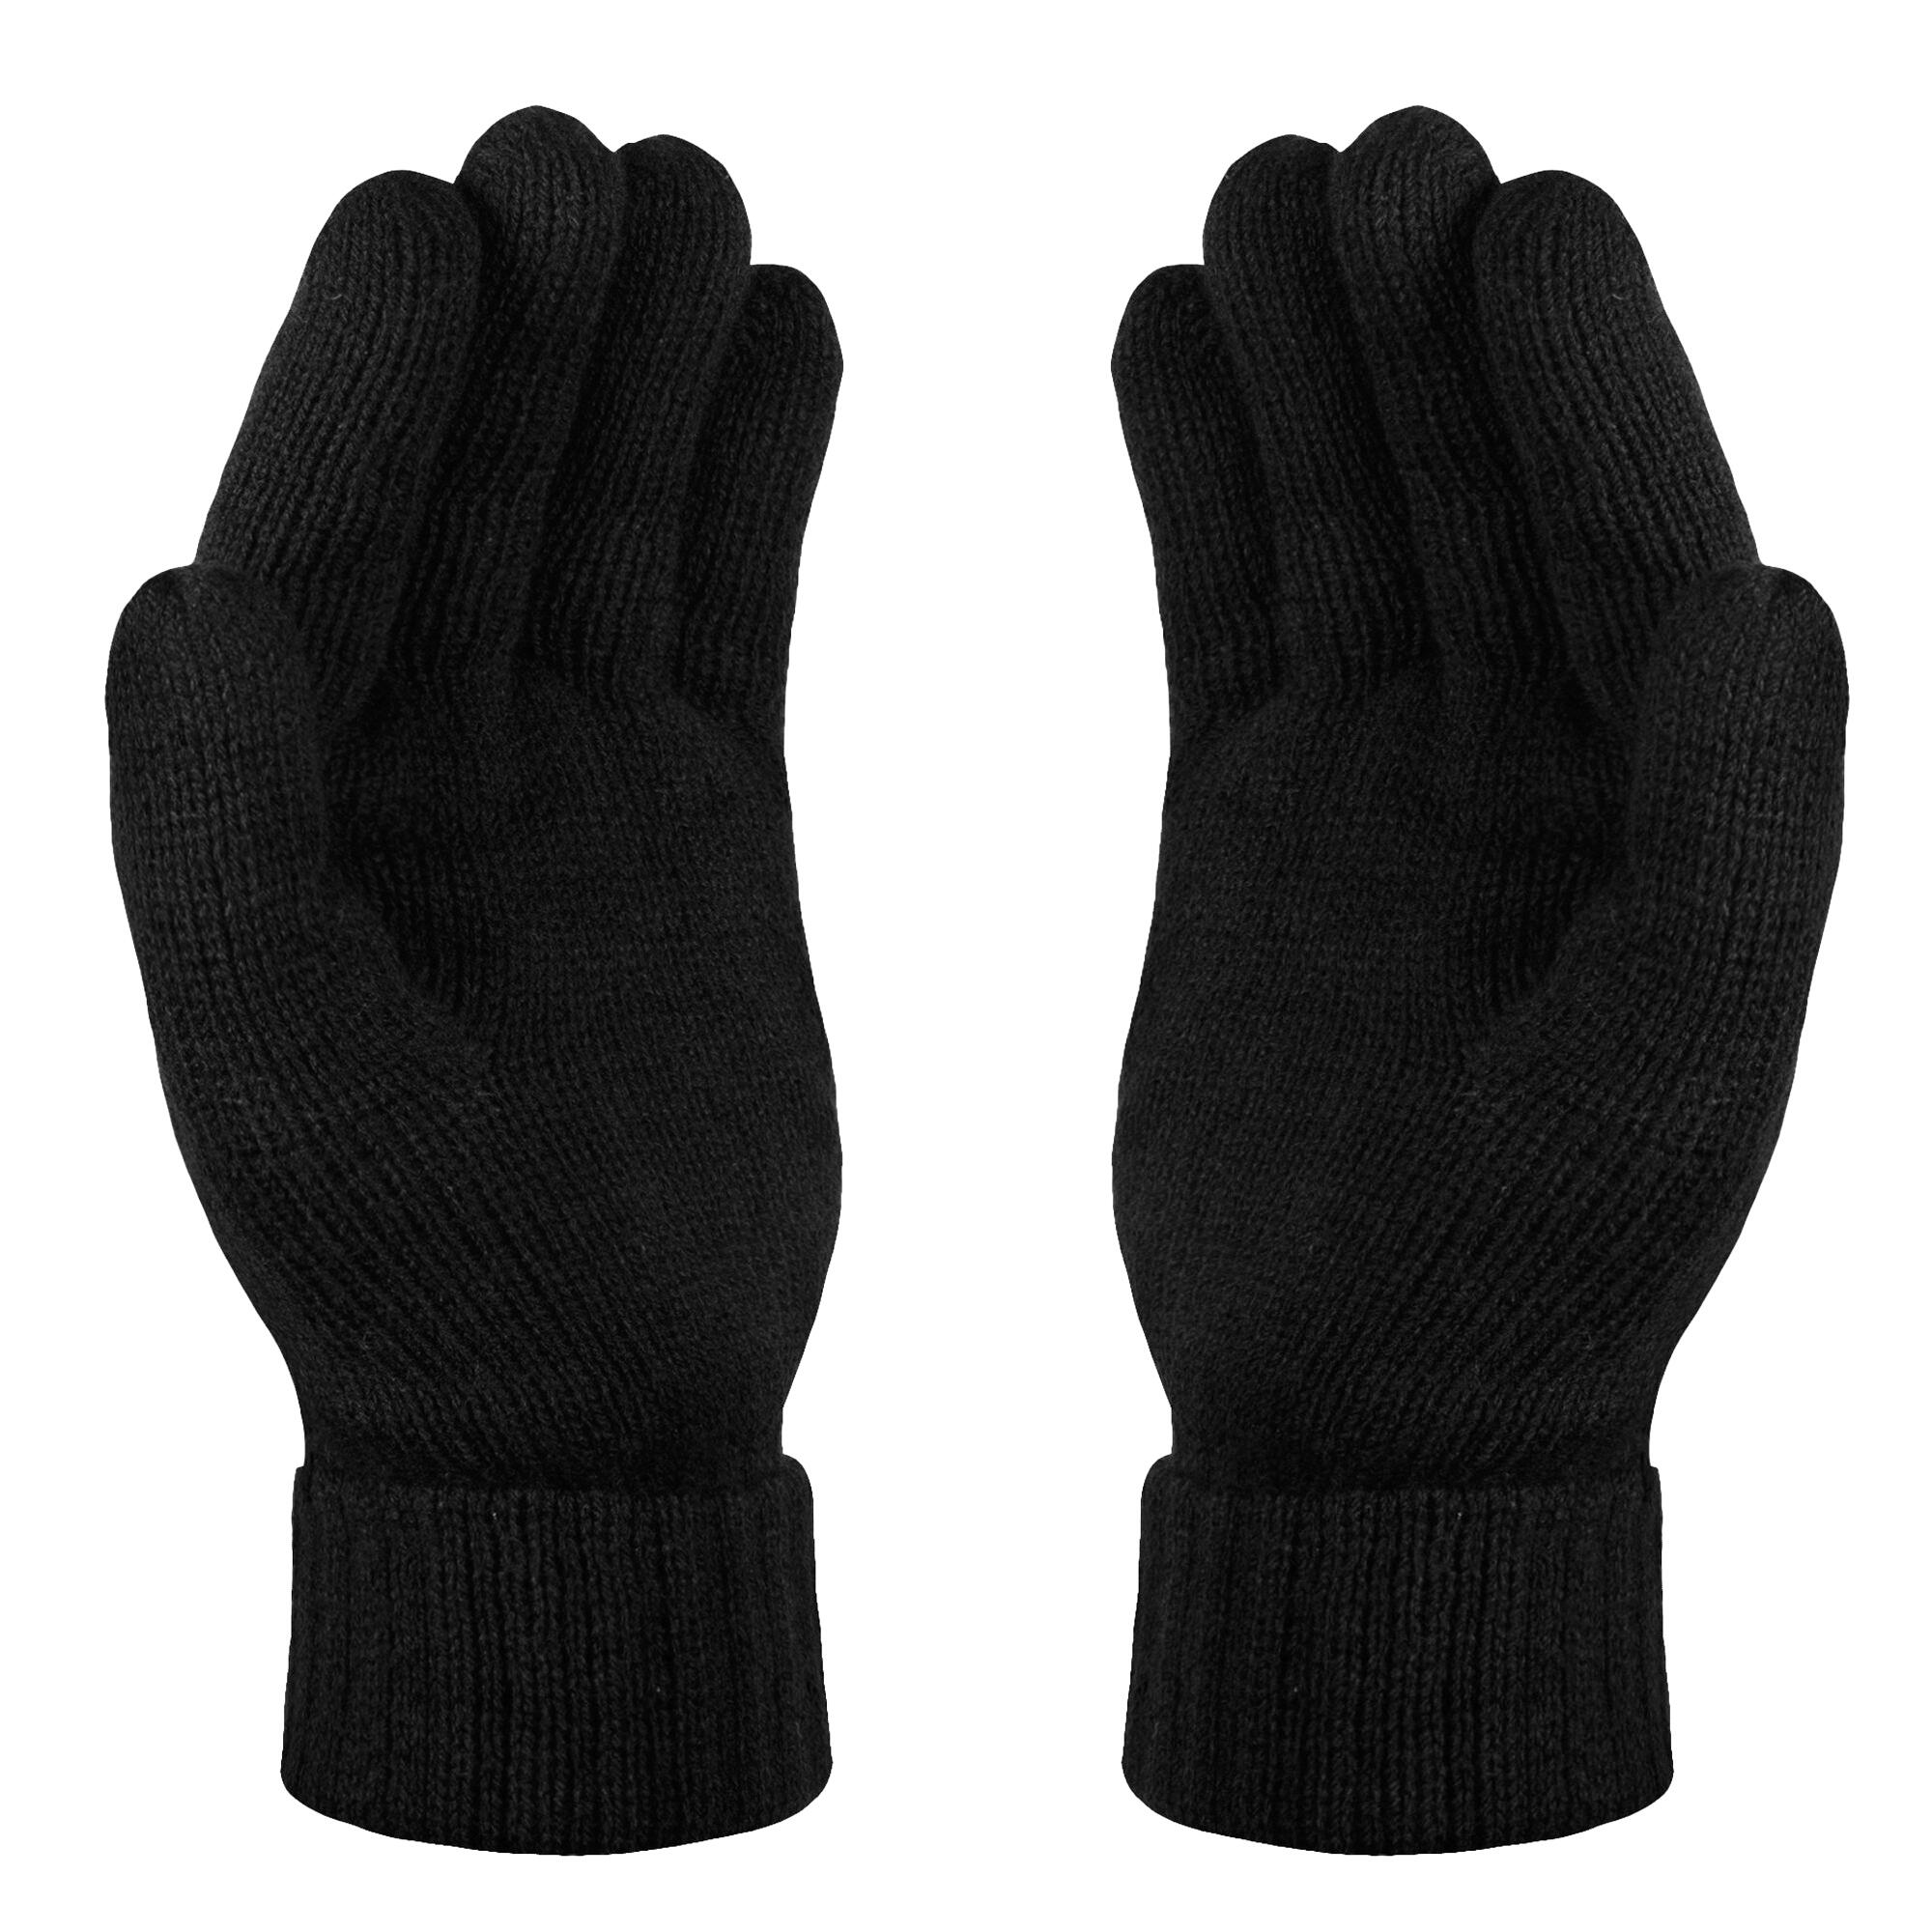 Unisex Thinsulate Thermal Winter Gloves (Black) 3/4